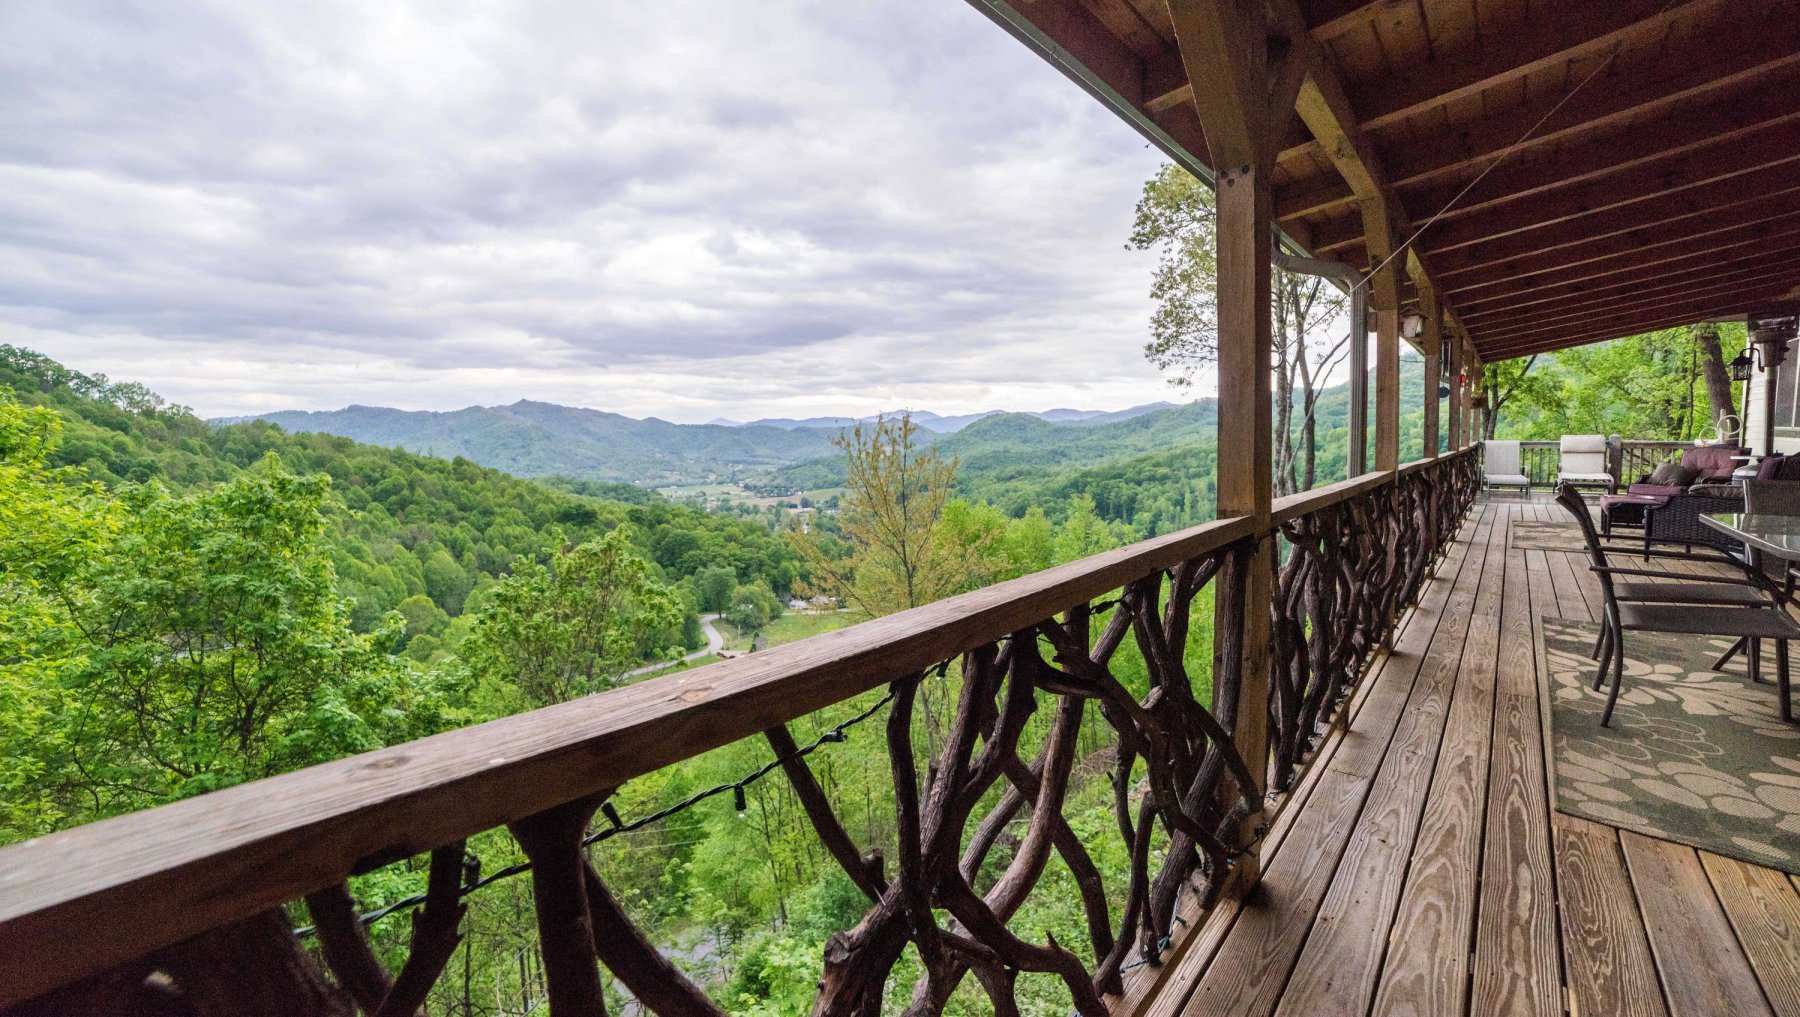 Mountain views off porch of cabin rental during daytime